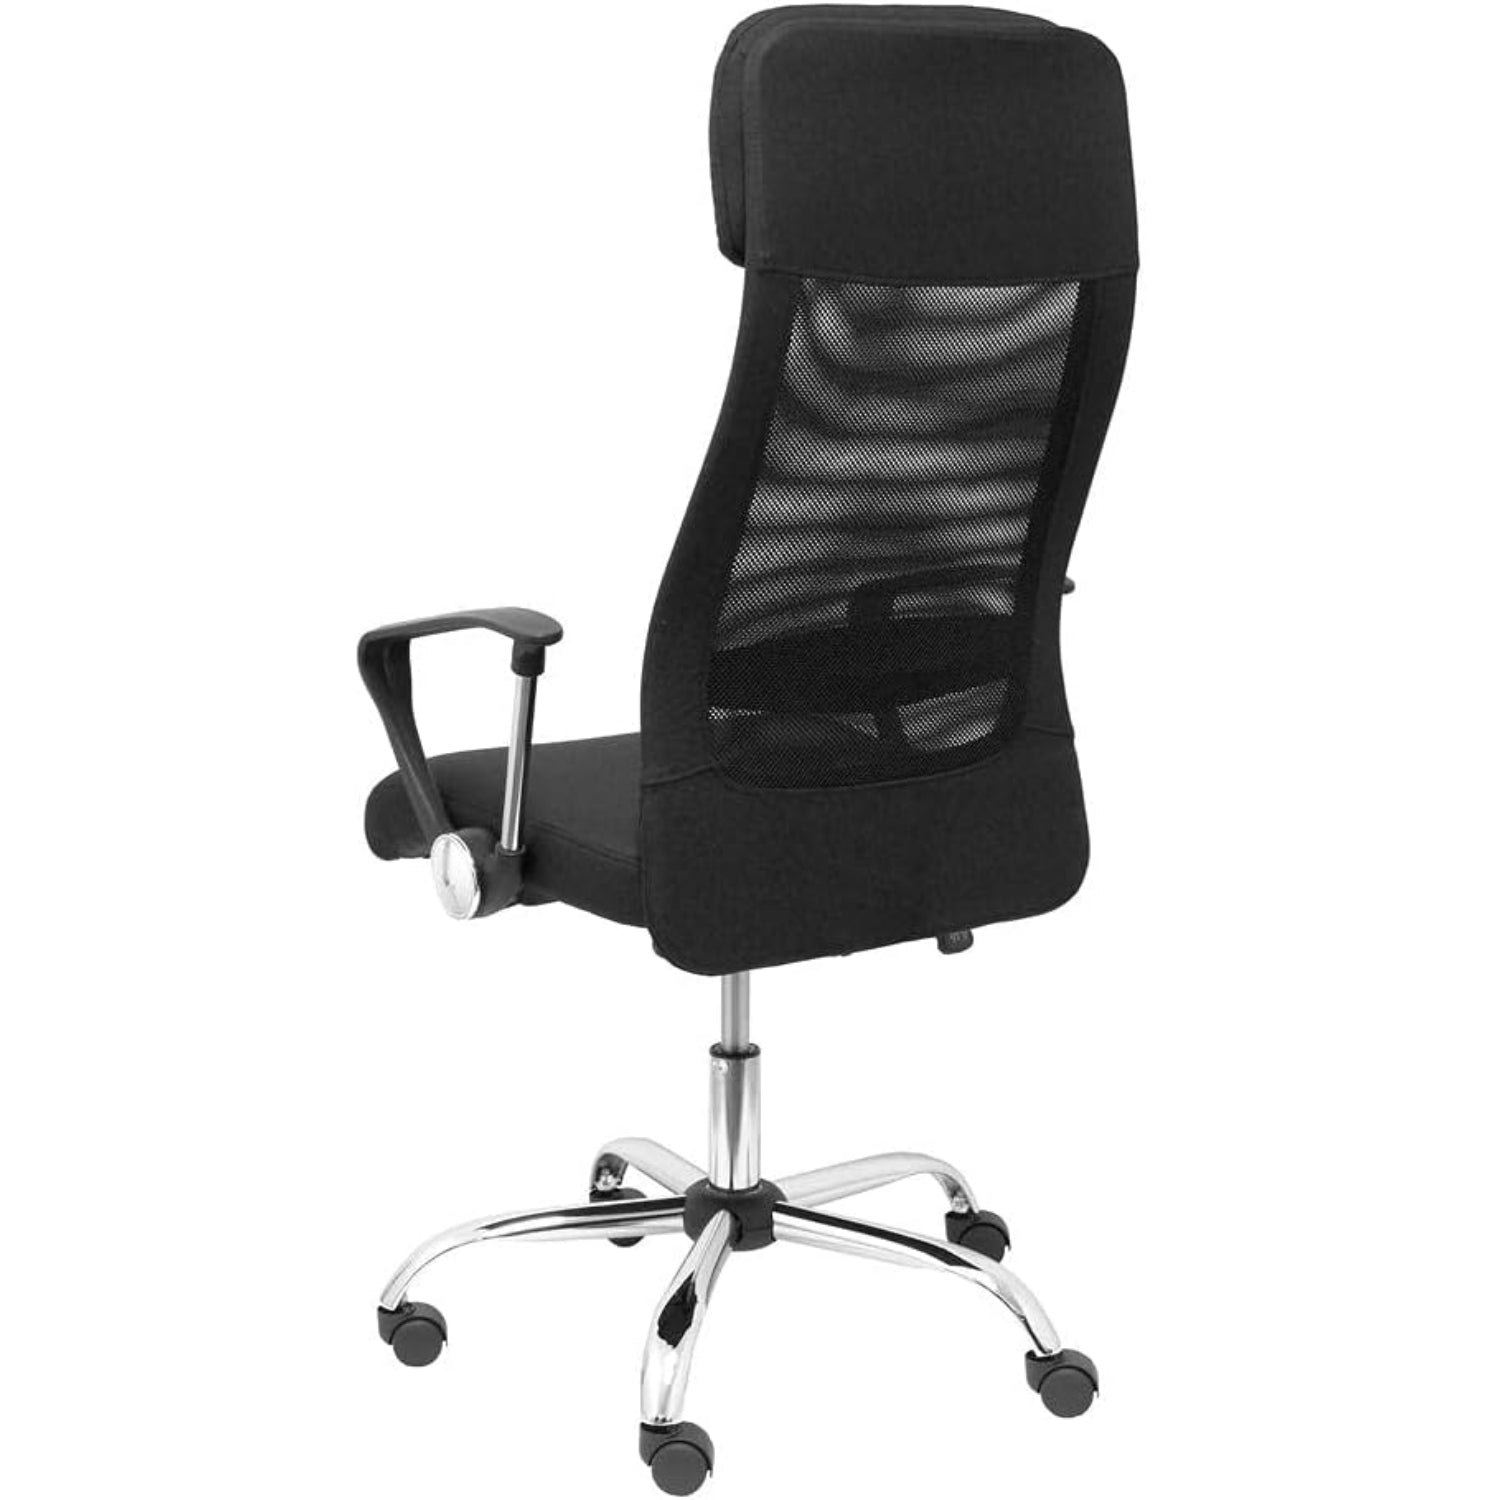 the clio office chair showcases a black mesh back and chrome legs.